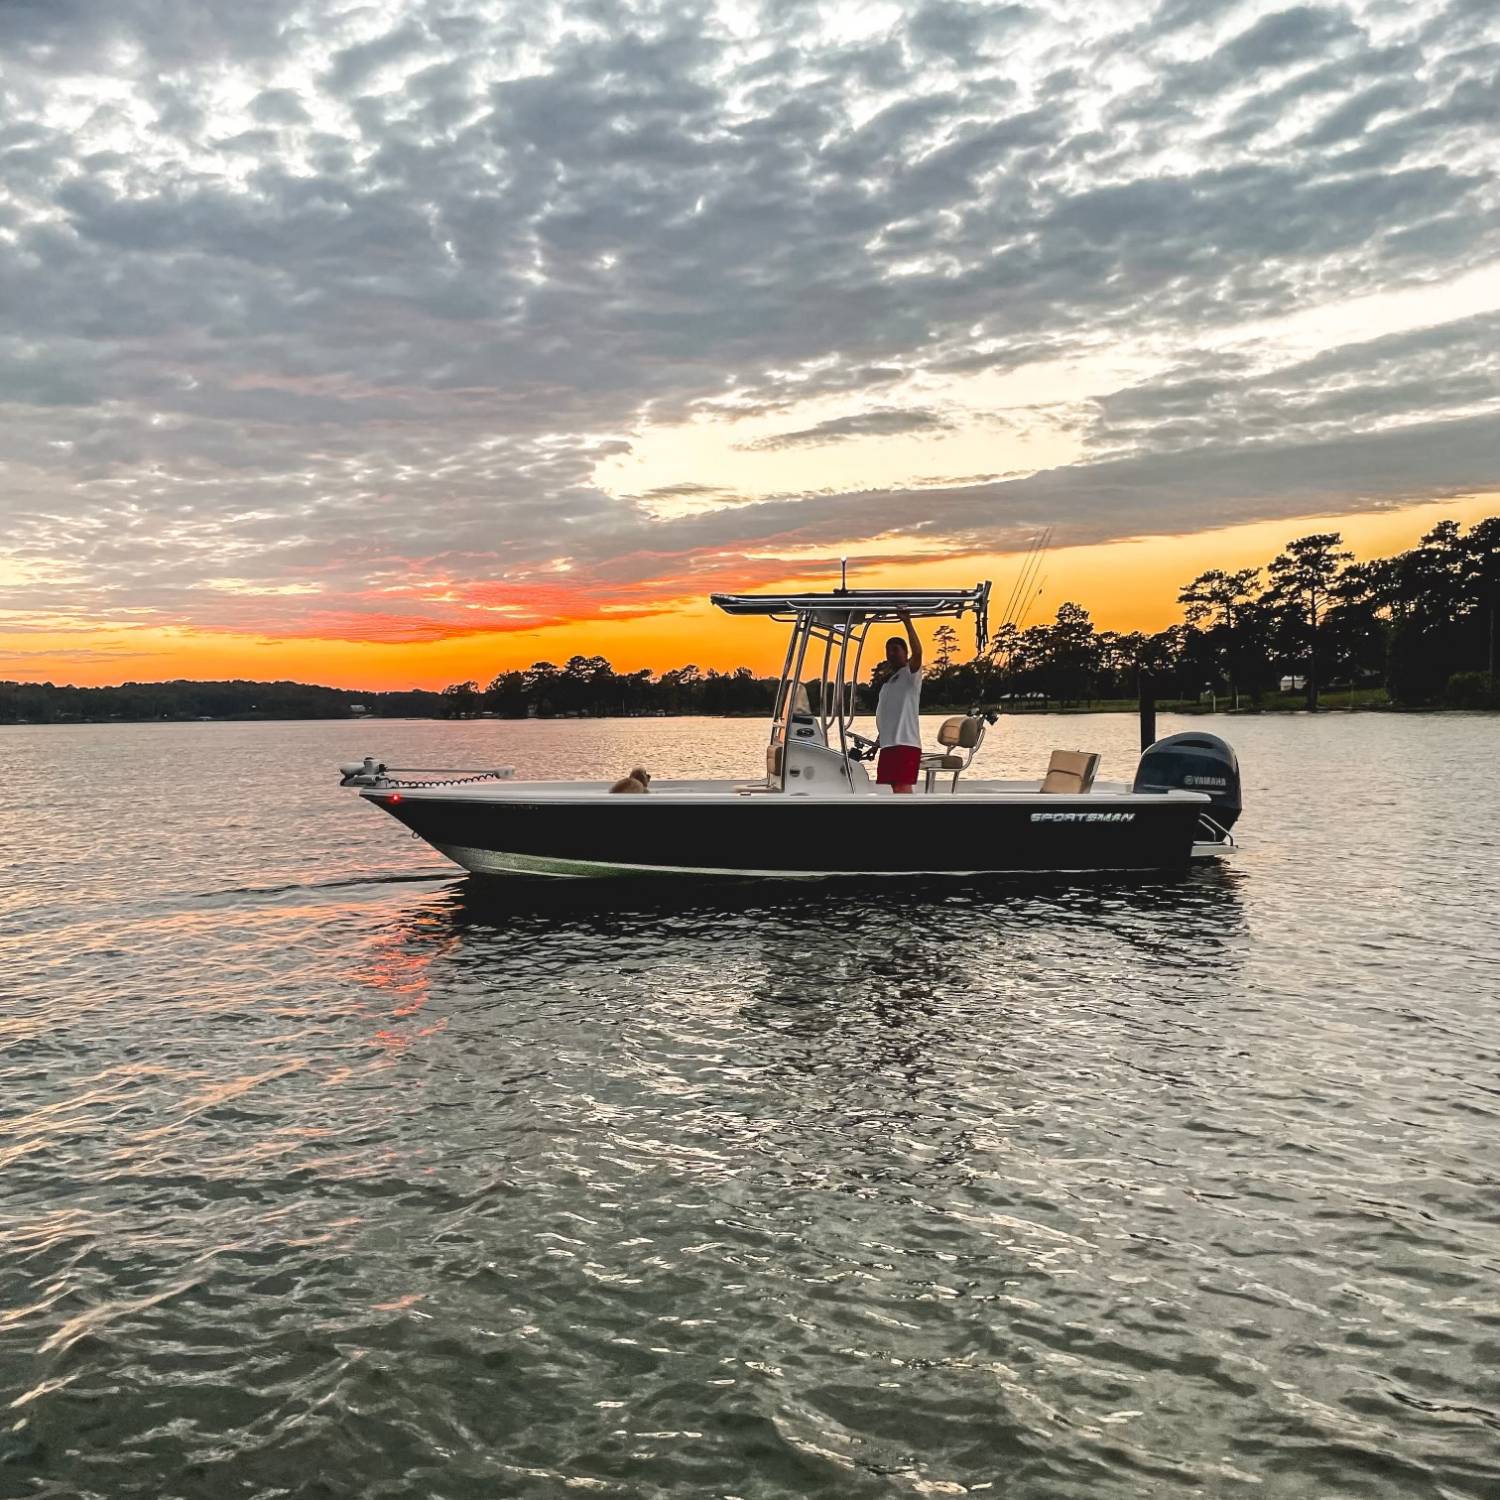 Title: A Sportsman's Sunset - On board their Sportsman Masters 227 Bay Boat - Location: Logan Martin Lake, AL. Participating in the Photo Contest #SportsmanOctober